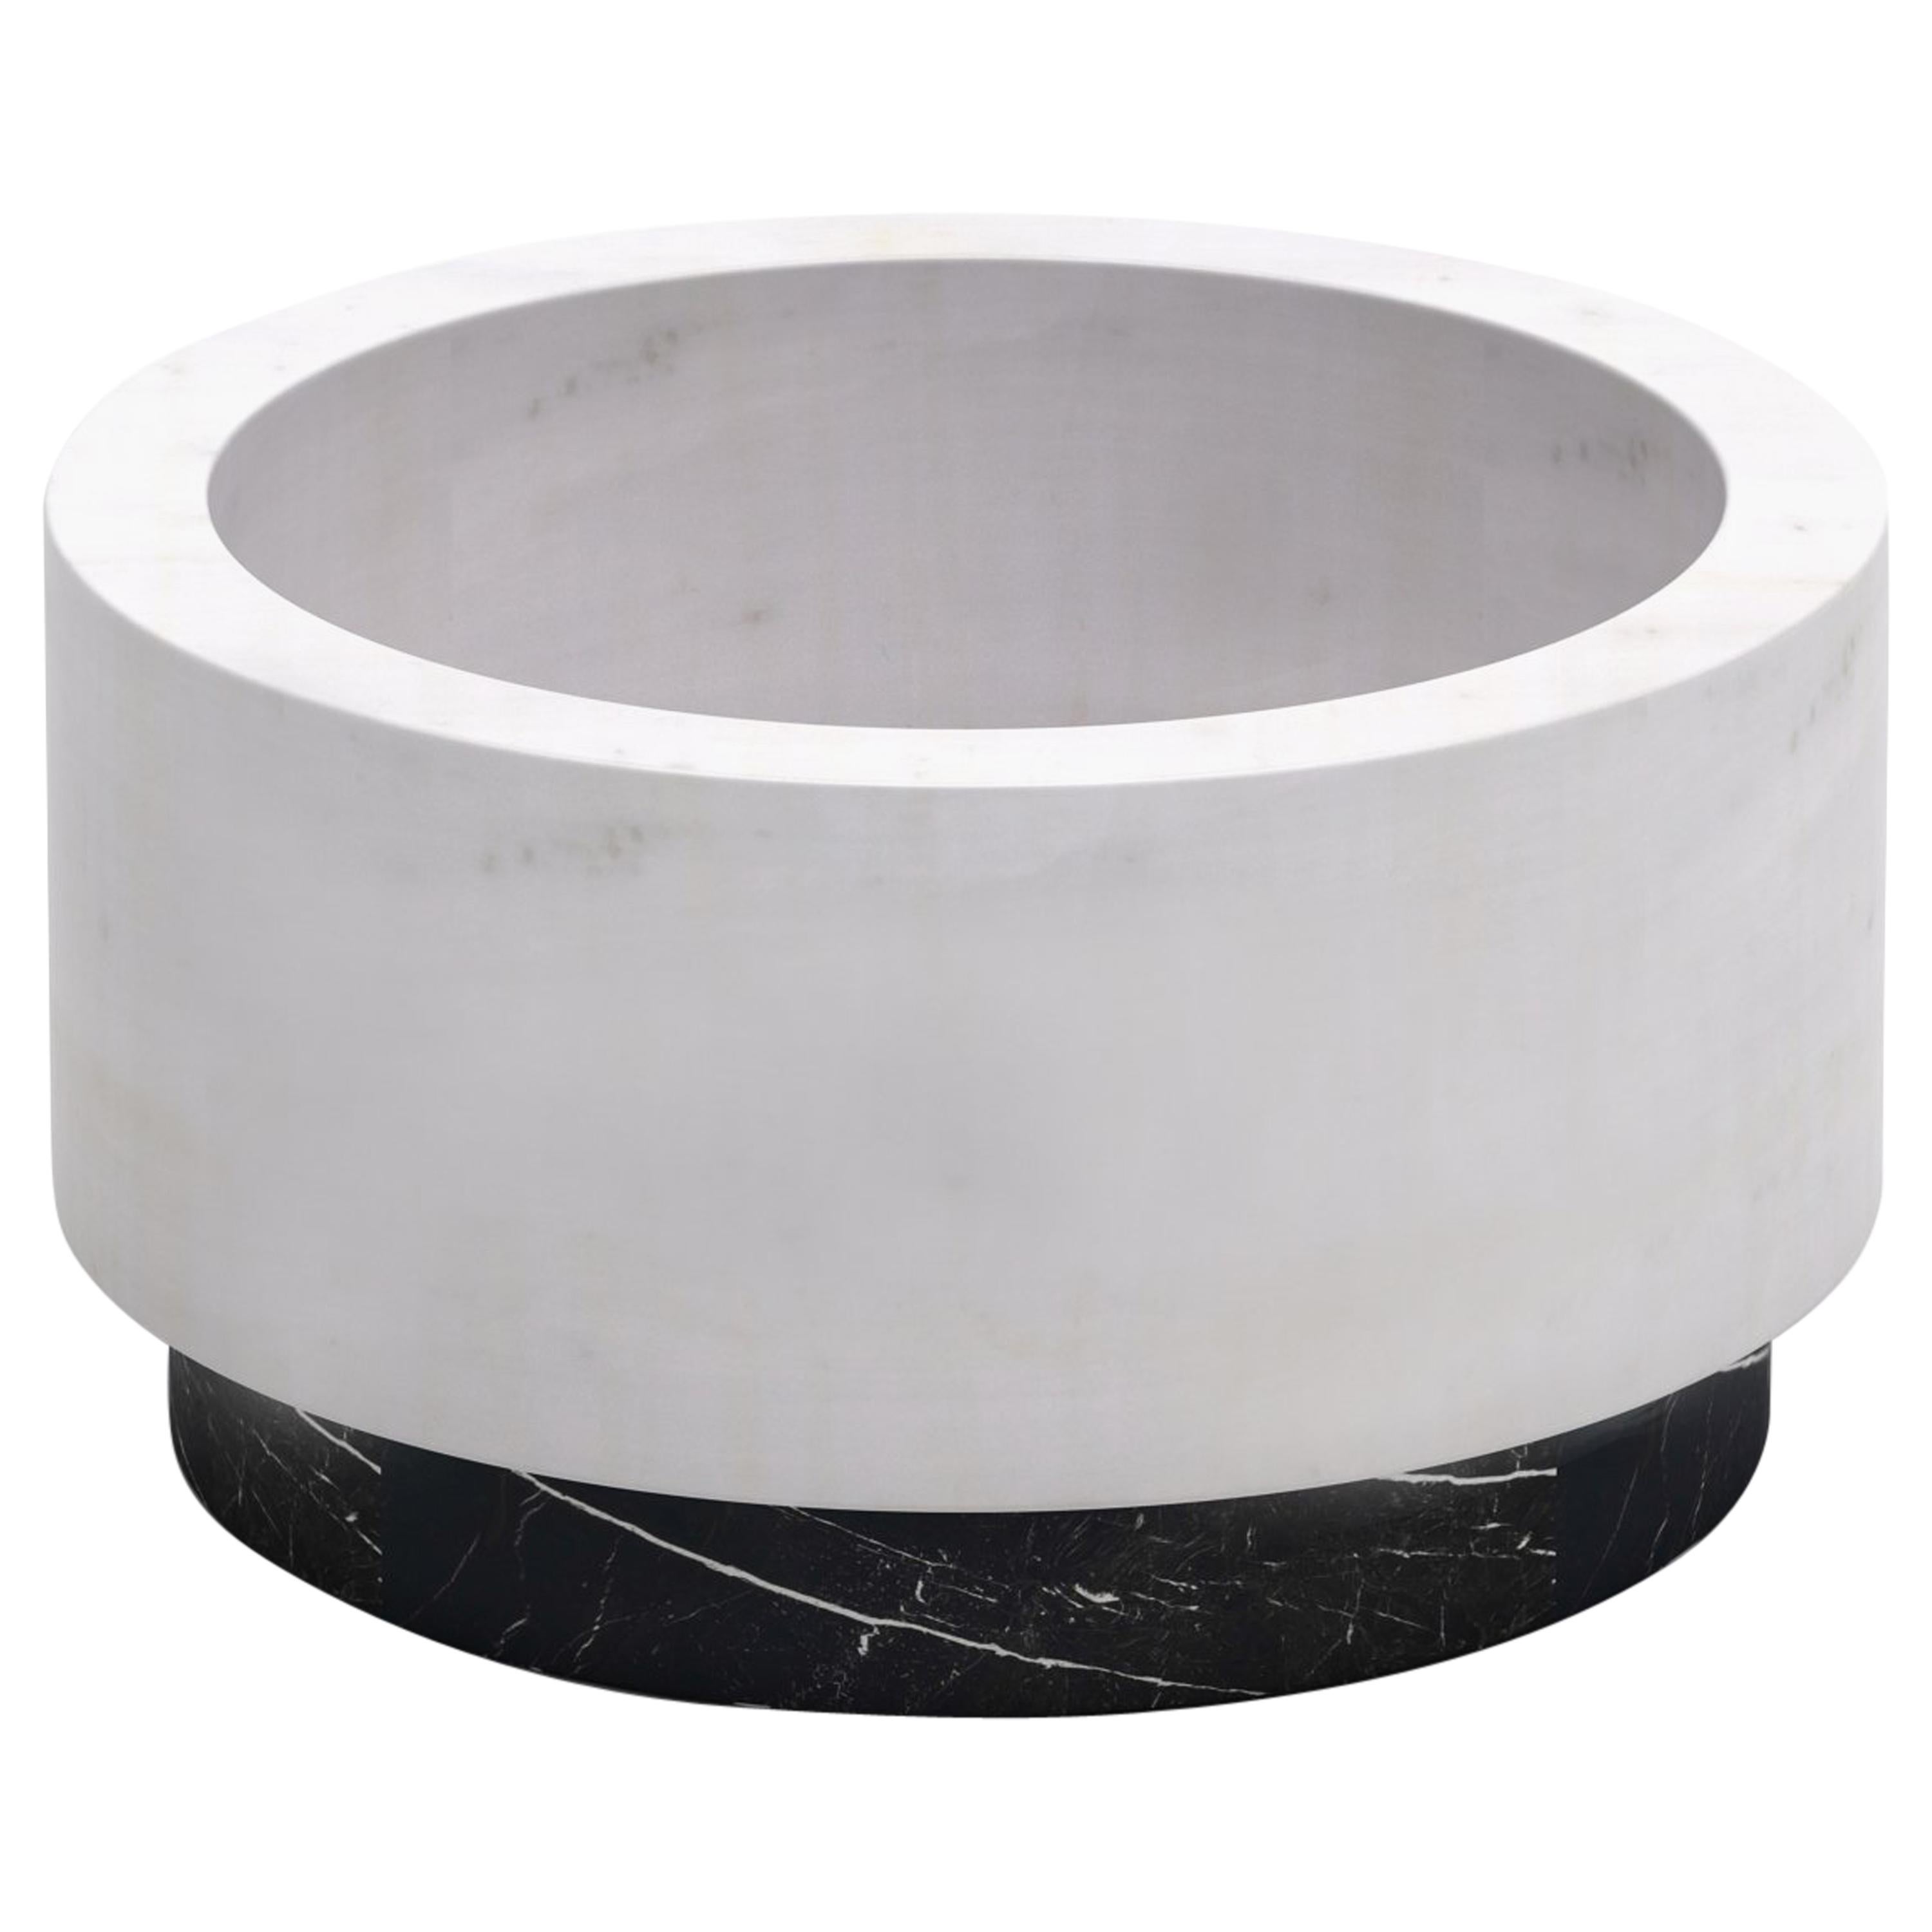 B&W Basin from White and Black Marble in Circular Shape